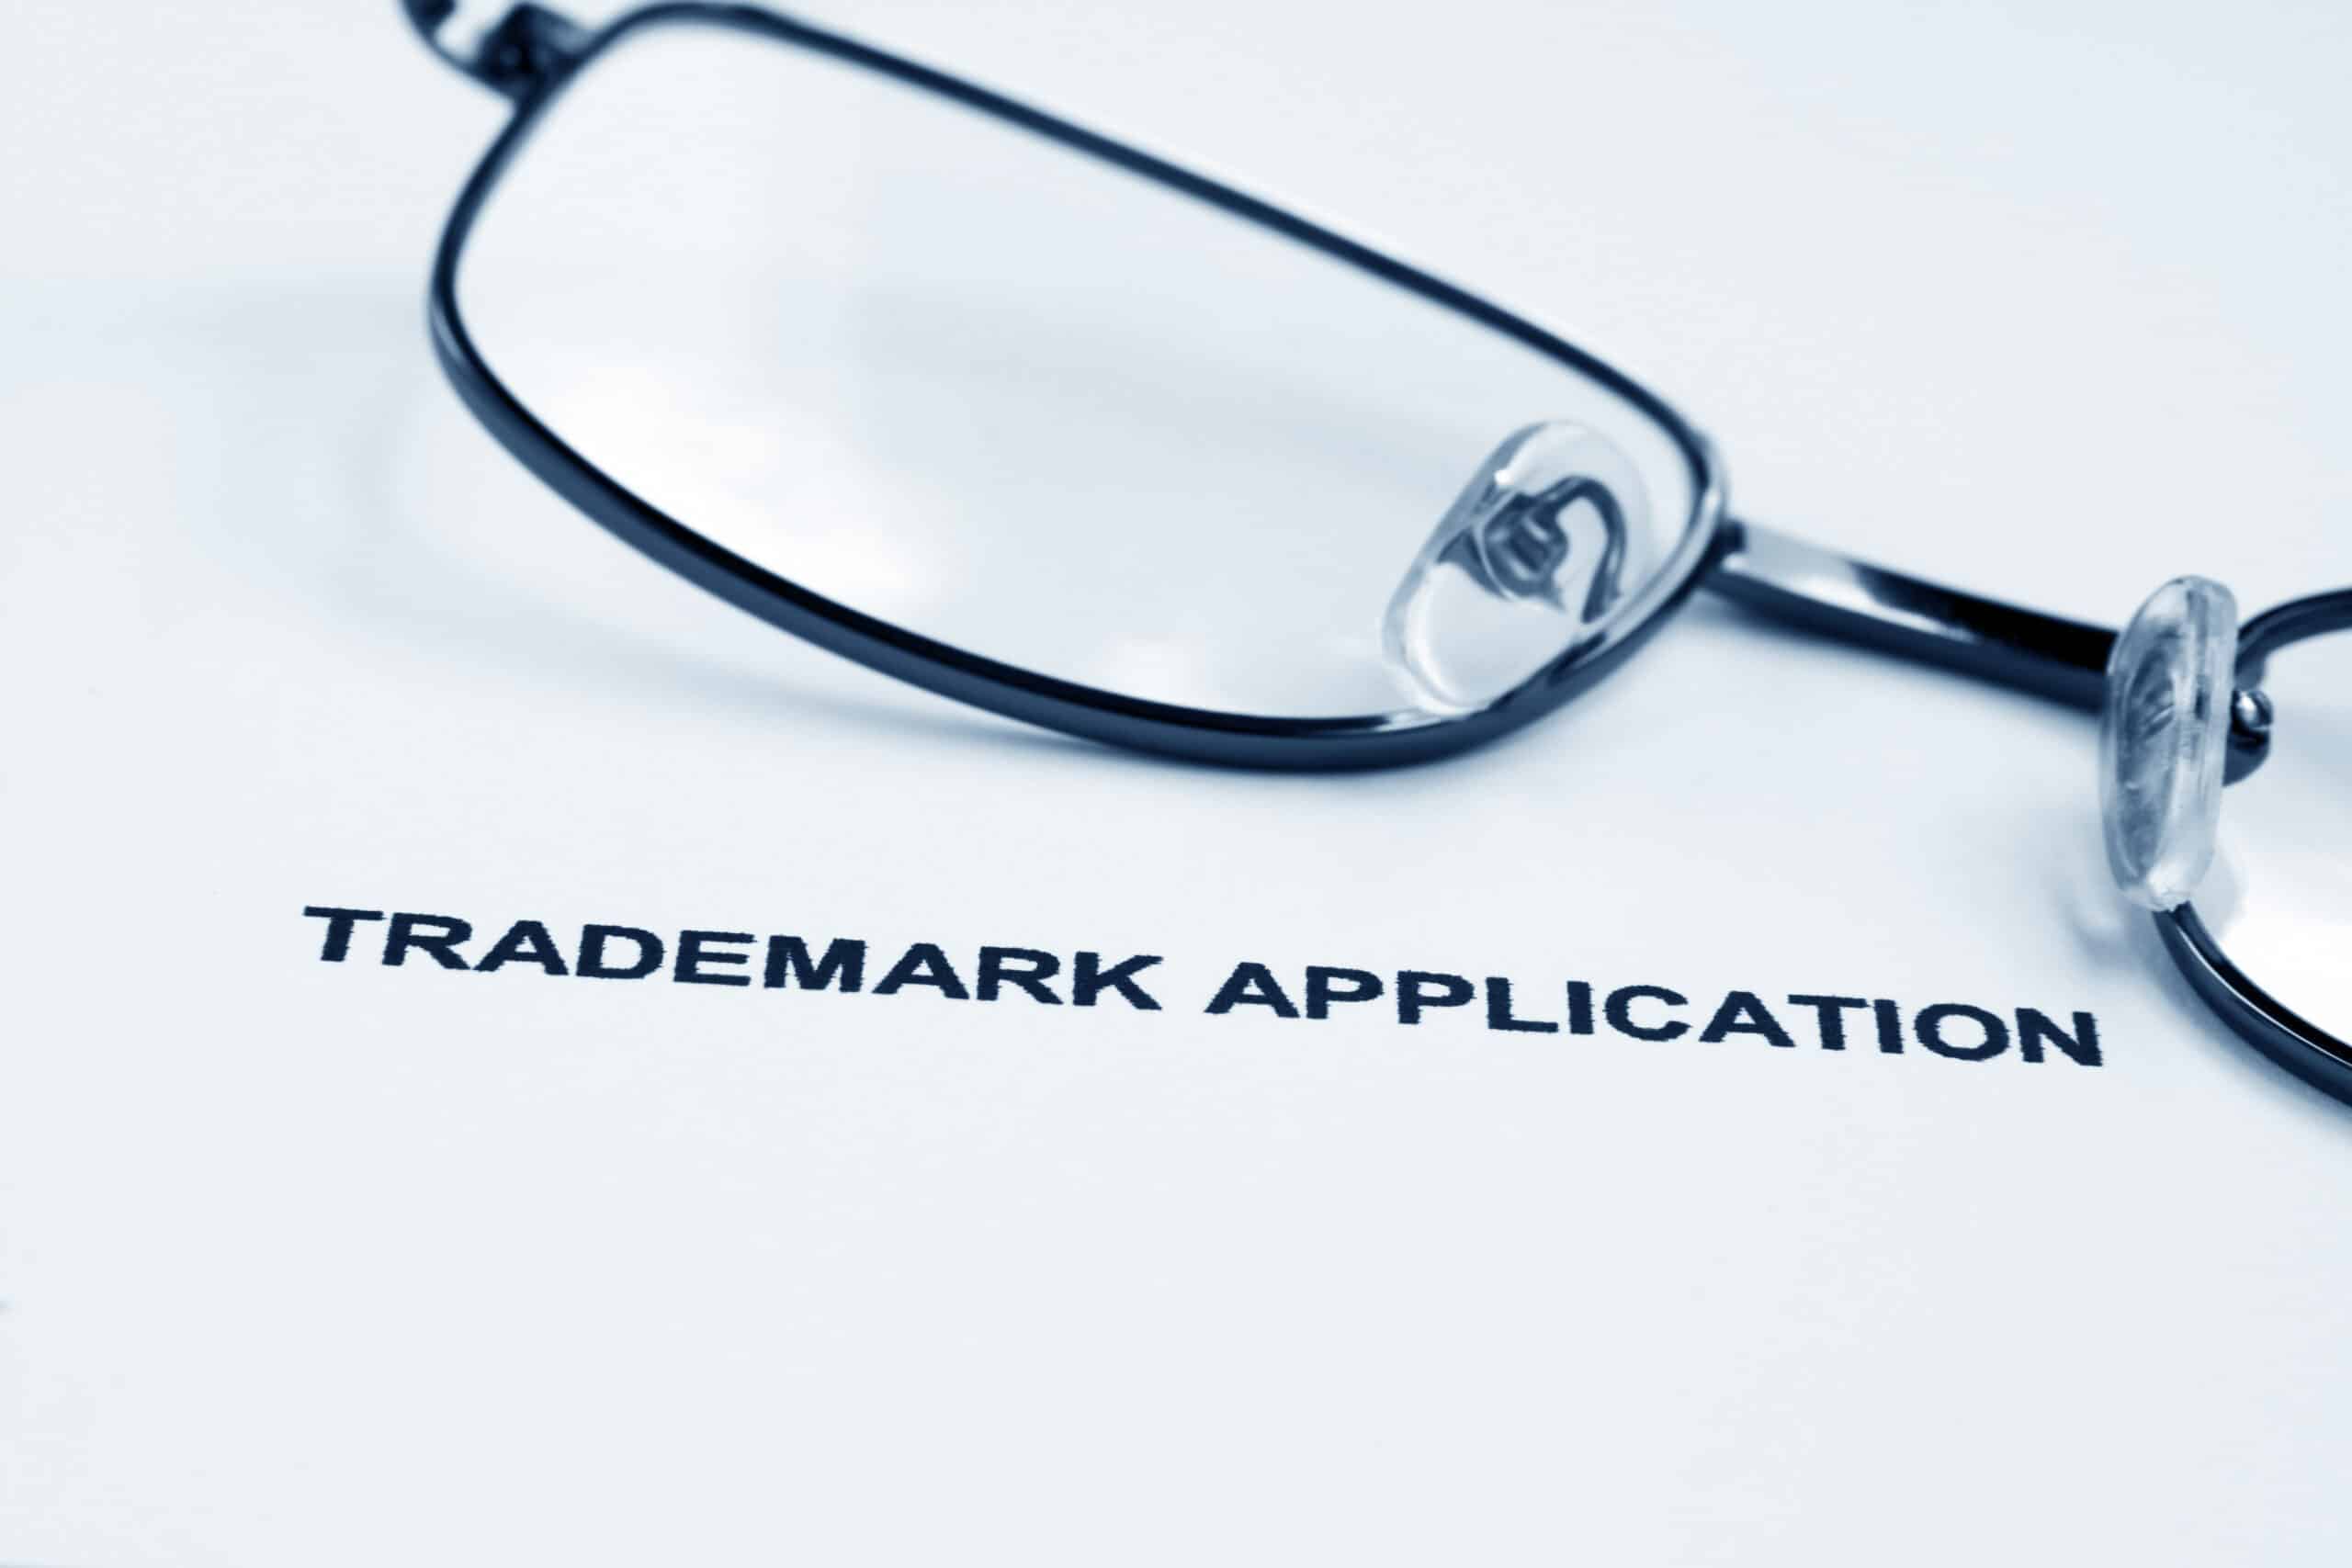 A pair of glasses rests on a trademark application